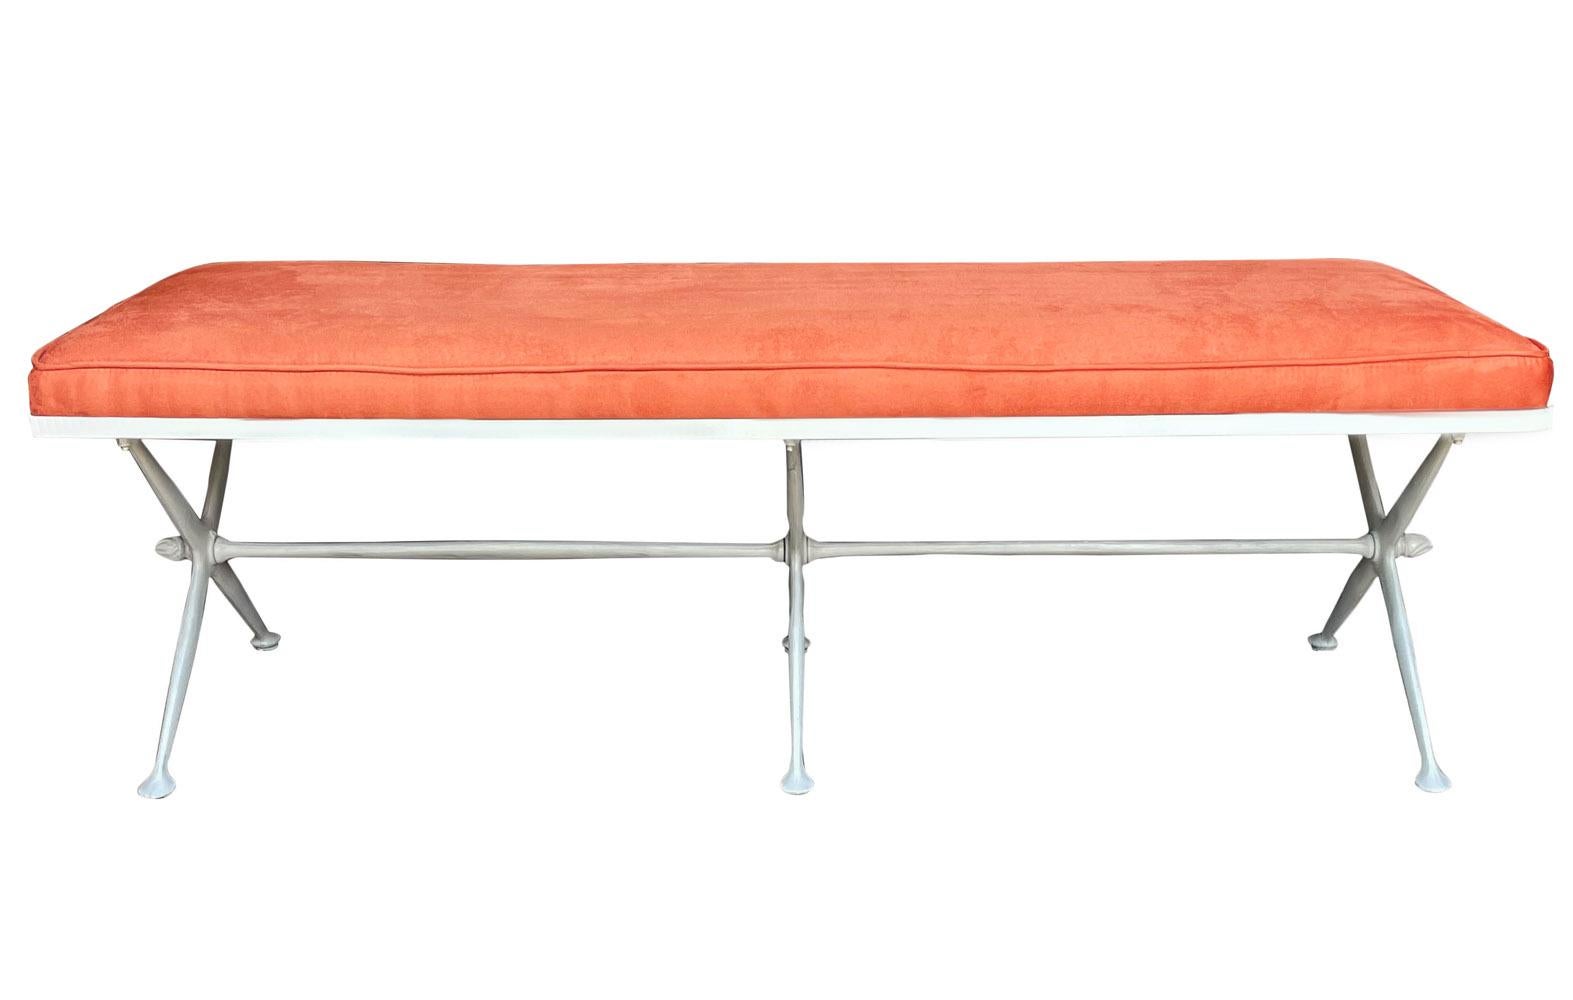 A sleek modern bench circa 1960's. It features an off white powder coated cast aluminum X base with Orange velvet seat. Restored condition.